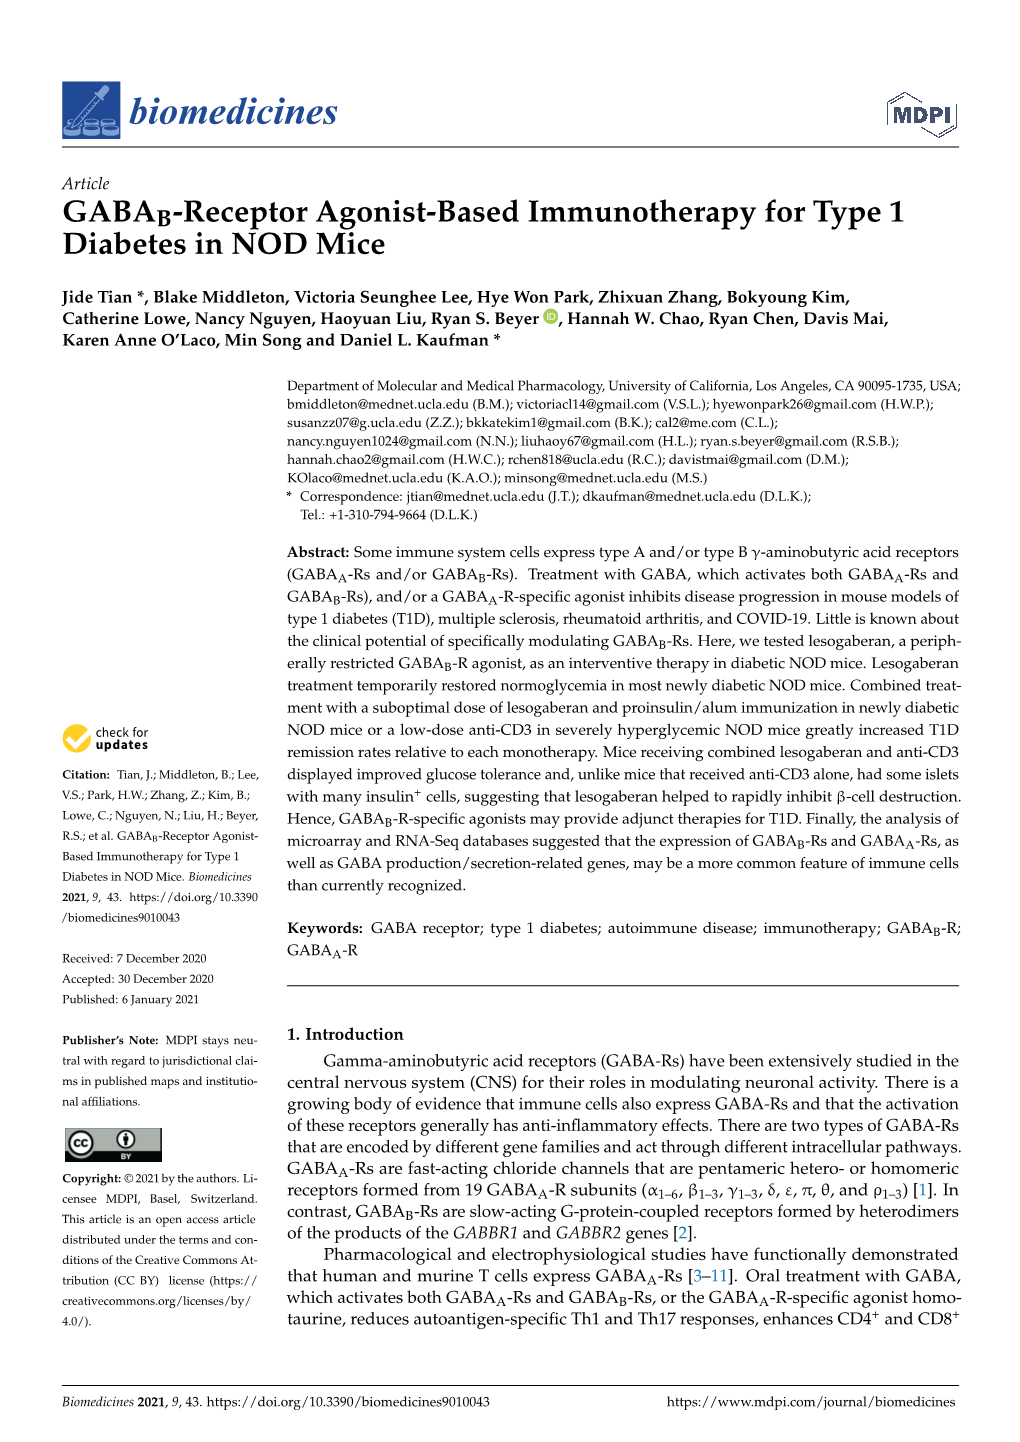 GABAB-Receptor Agonist-Based Immunotherapy for Type 1 Diabetes in NOD Mice